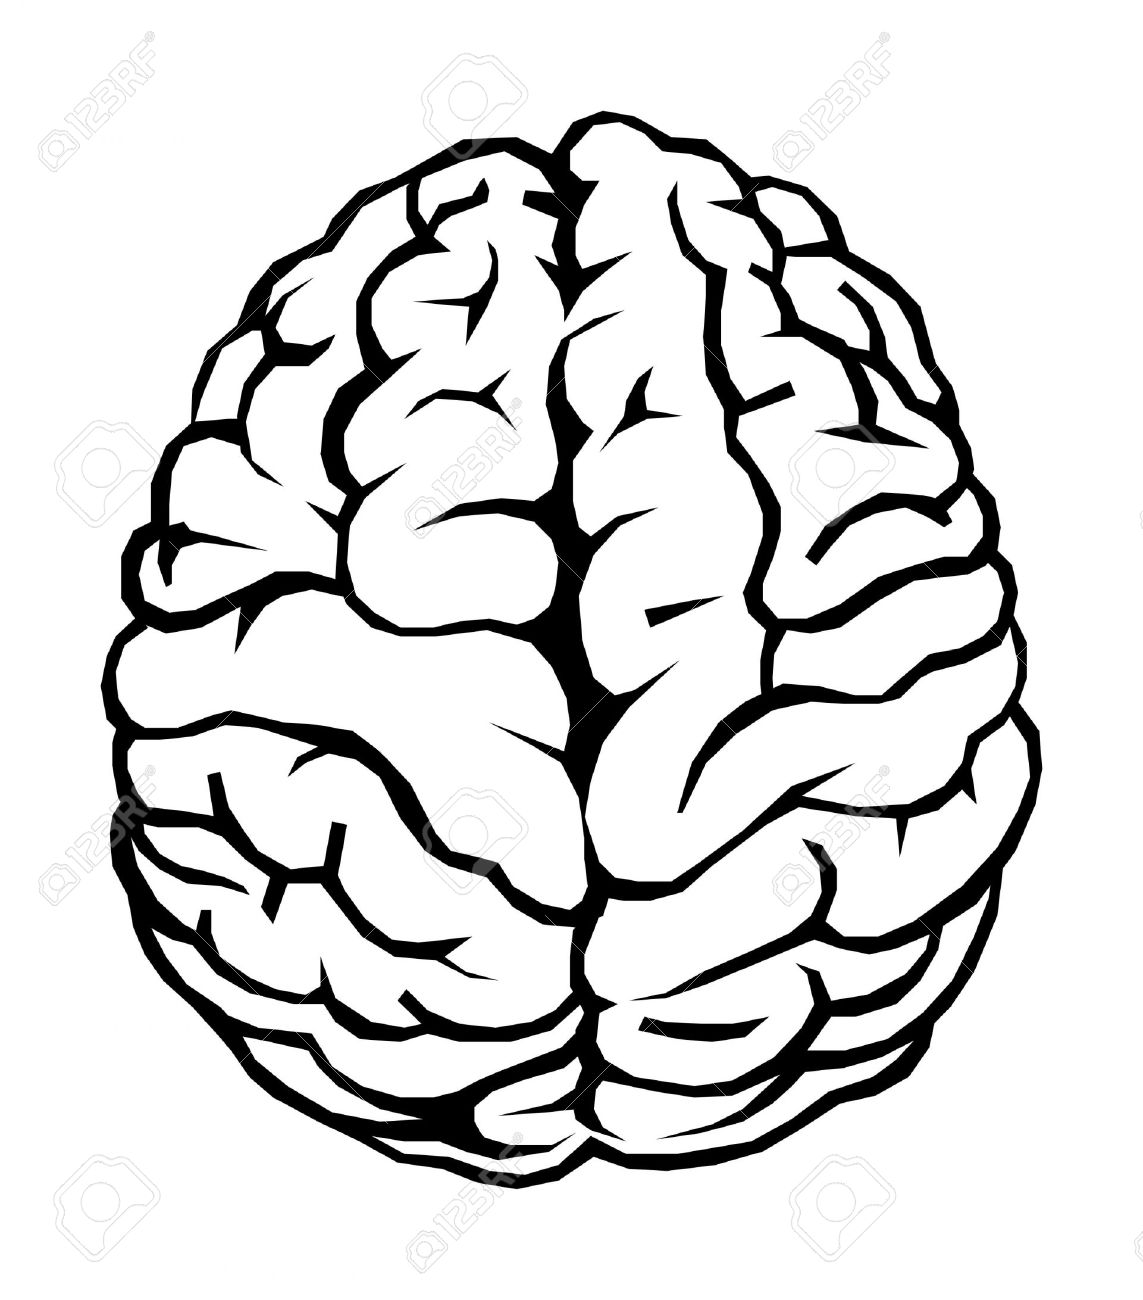 Human brain stock photo picture and royalty free image image